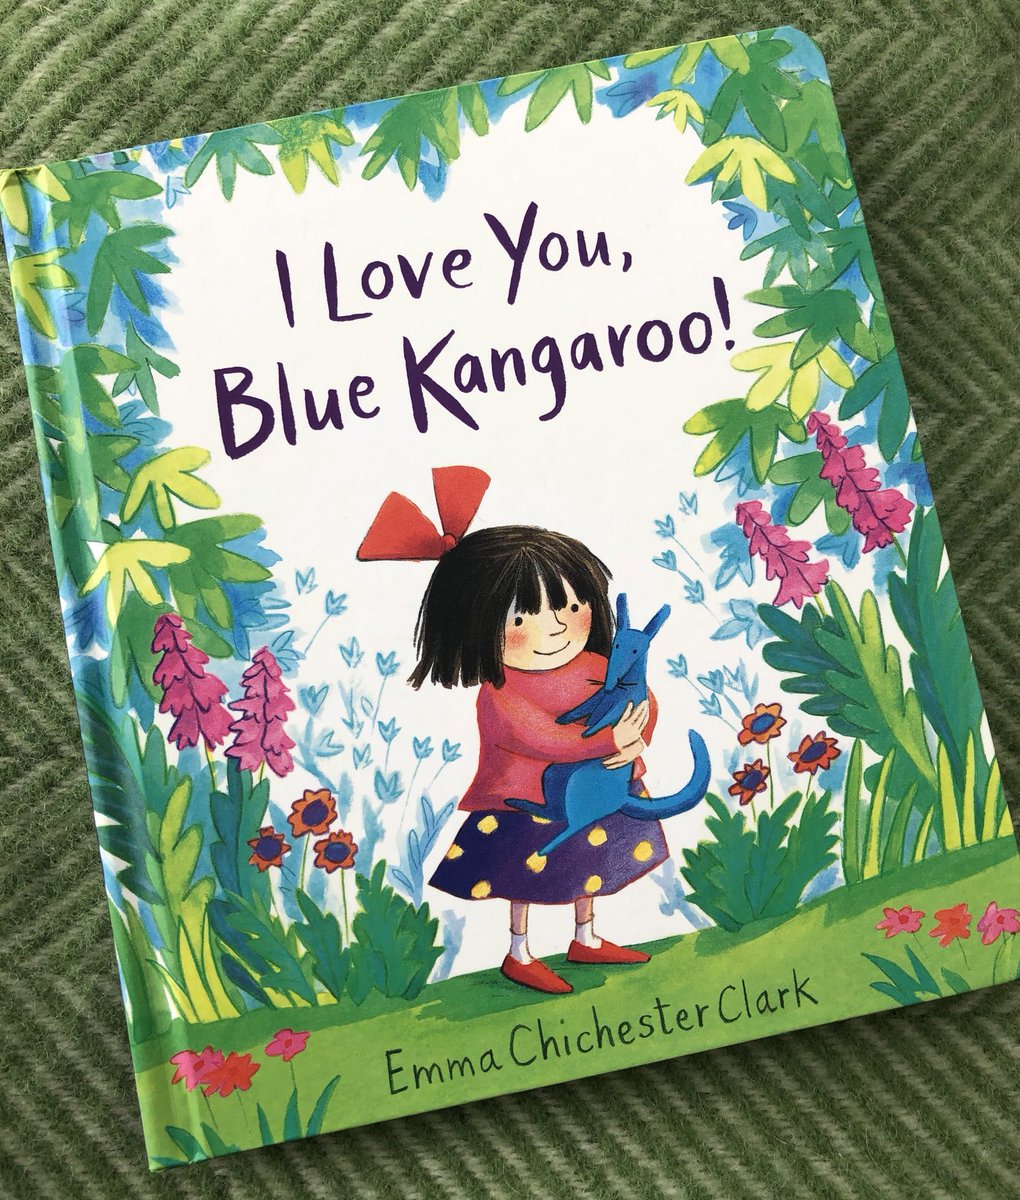 No.30  #LibraryTop59 Emma Chichester Clark  @emmachichesterc uses gorgeous colour palettes and clever designs in her famous Blue Kangaroo books. Visit her Plum Dog Blog  http://emmachichesterclark.blogspot.com  for painted scenes from real life that inspired books about him  https://en.m.wikipedia.org/wiki/Emma_Chichester_Clark